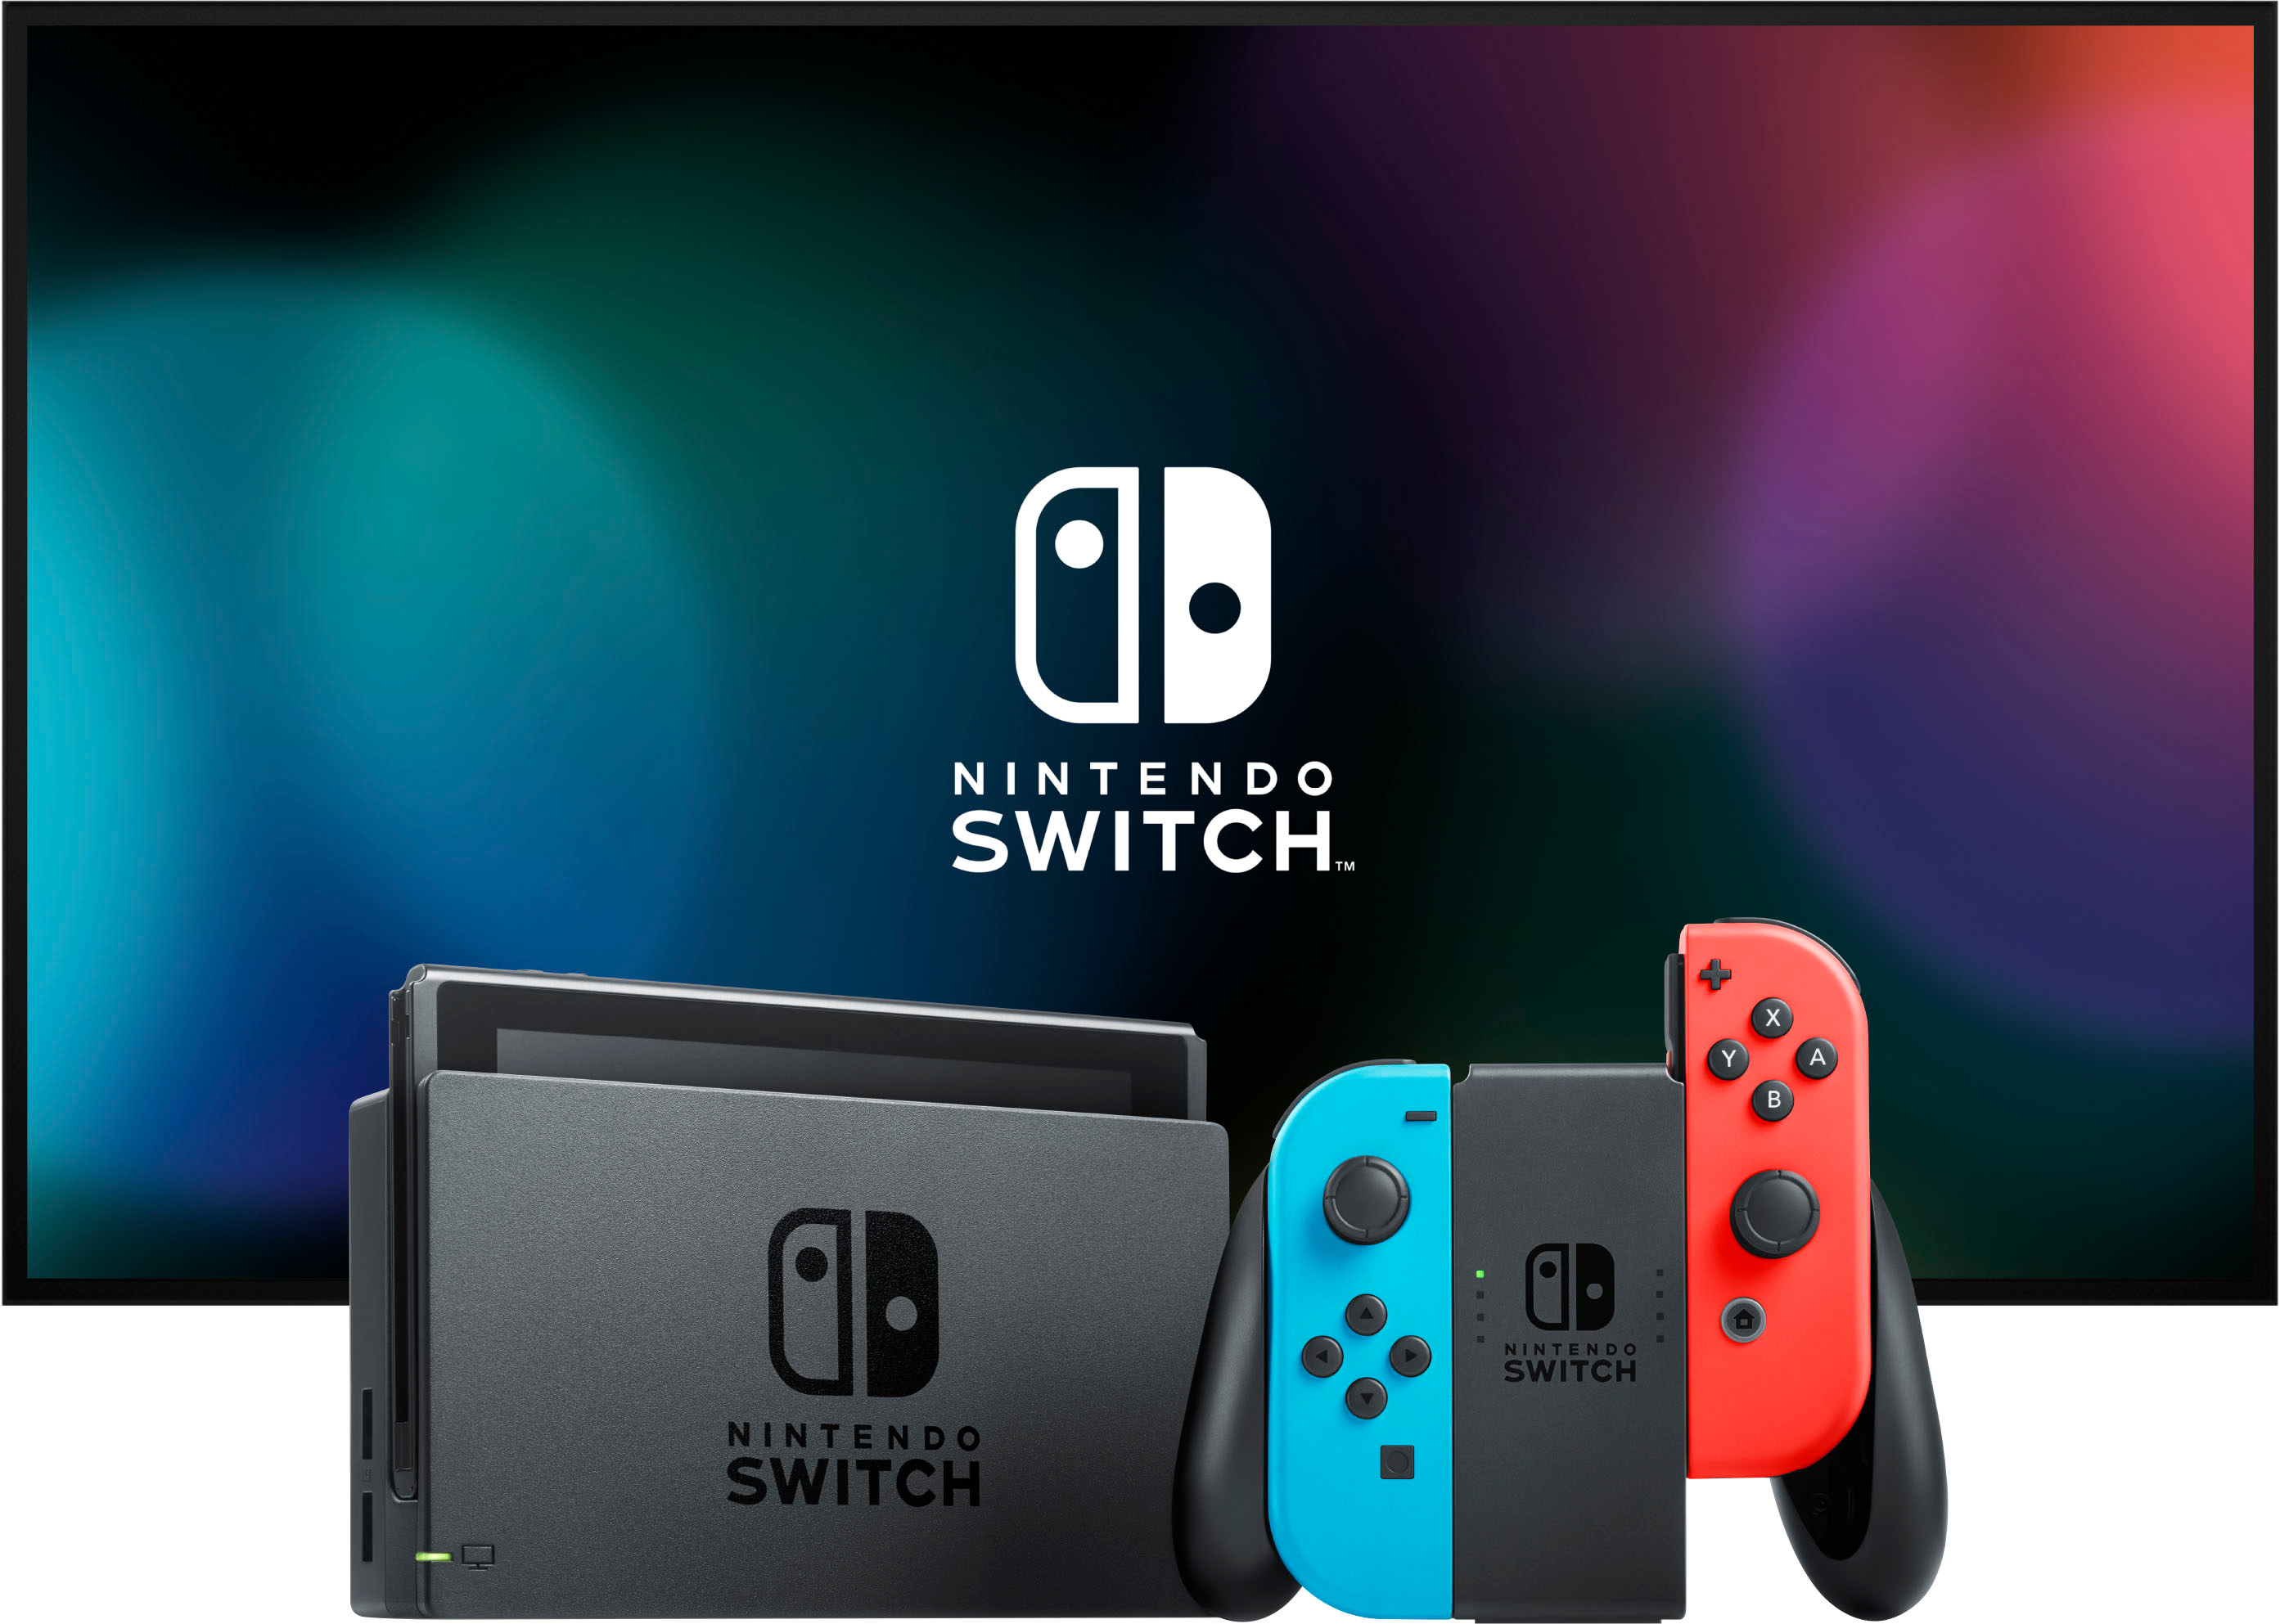 Nintendo Switch Bundle with Mario Kart 8 Deluxe Game and 3 Month Nintendo  Switch Online Membership